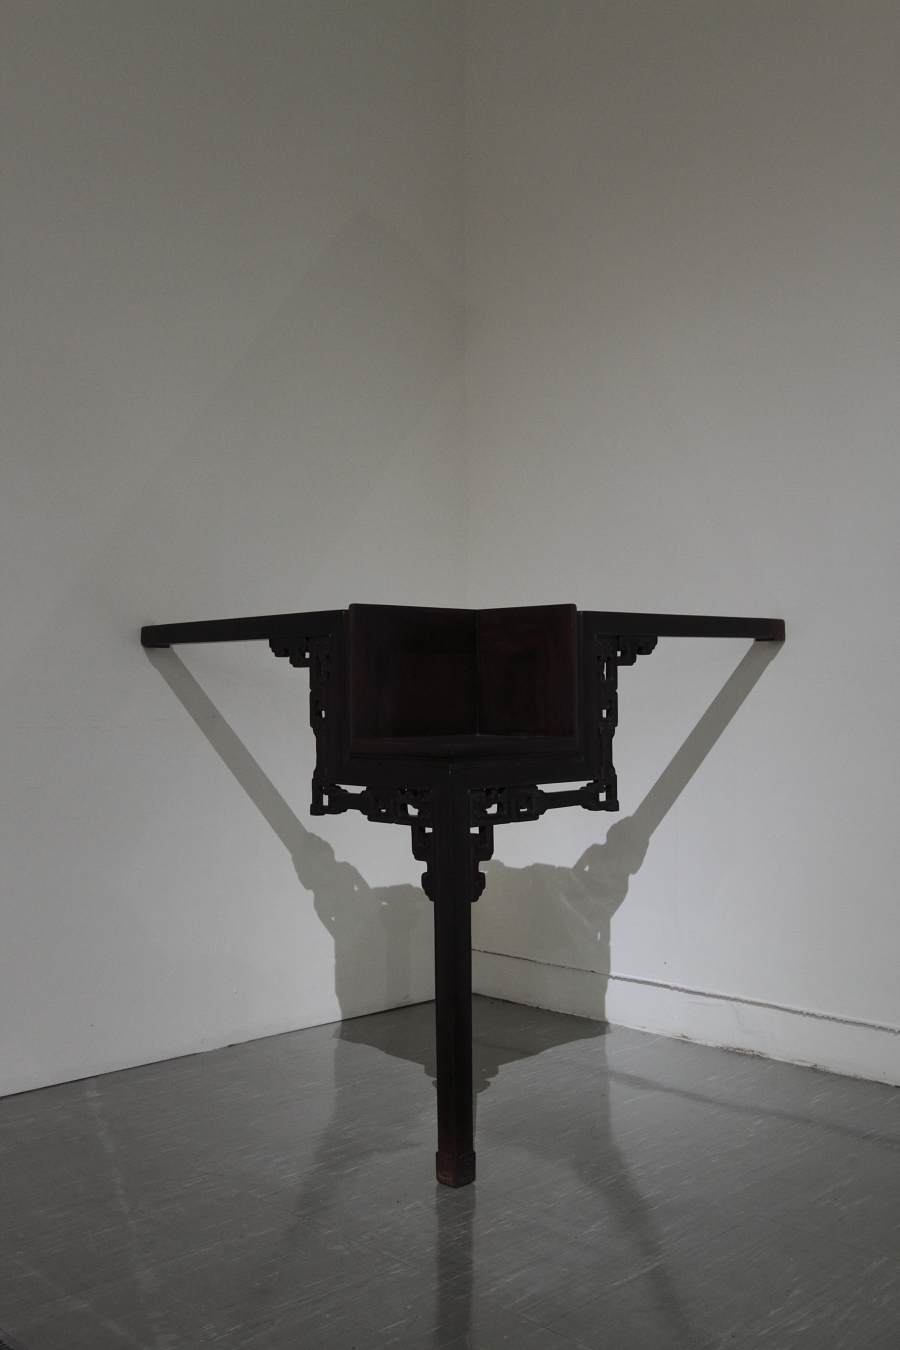 Table from the Qing Dynasty (1644-1911)  | Table with Three Legs   164 x 193 x 116 cm, 2010 的圖說